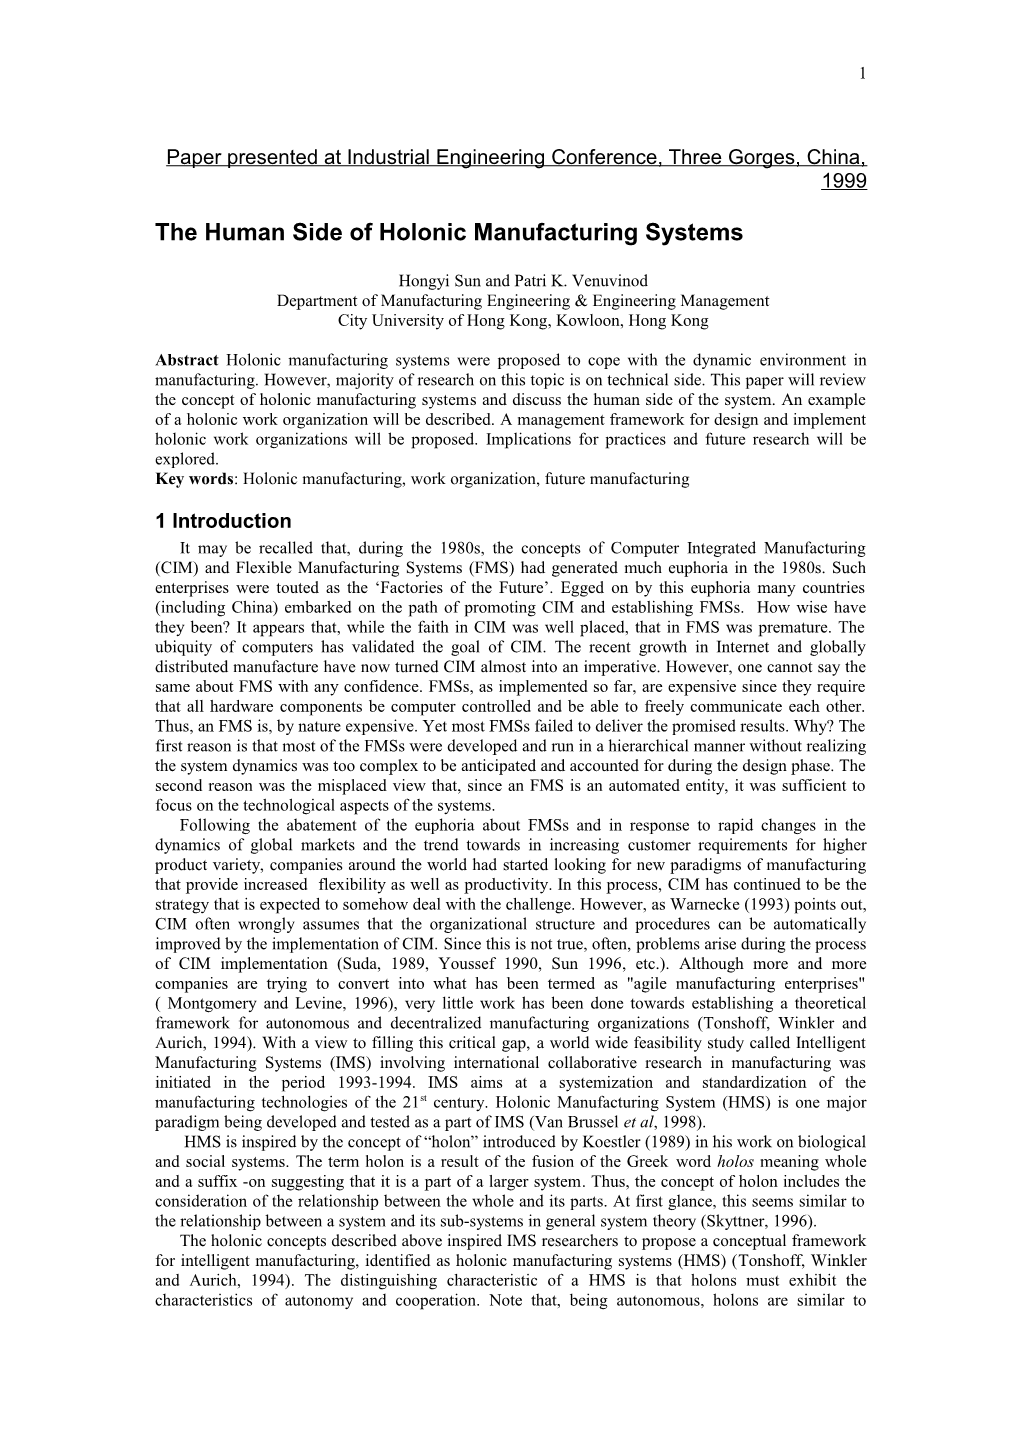 Human Side of Holonic Manufacturing System